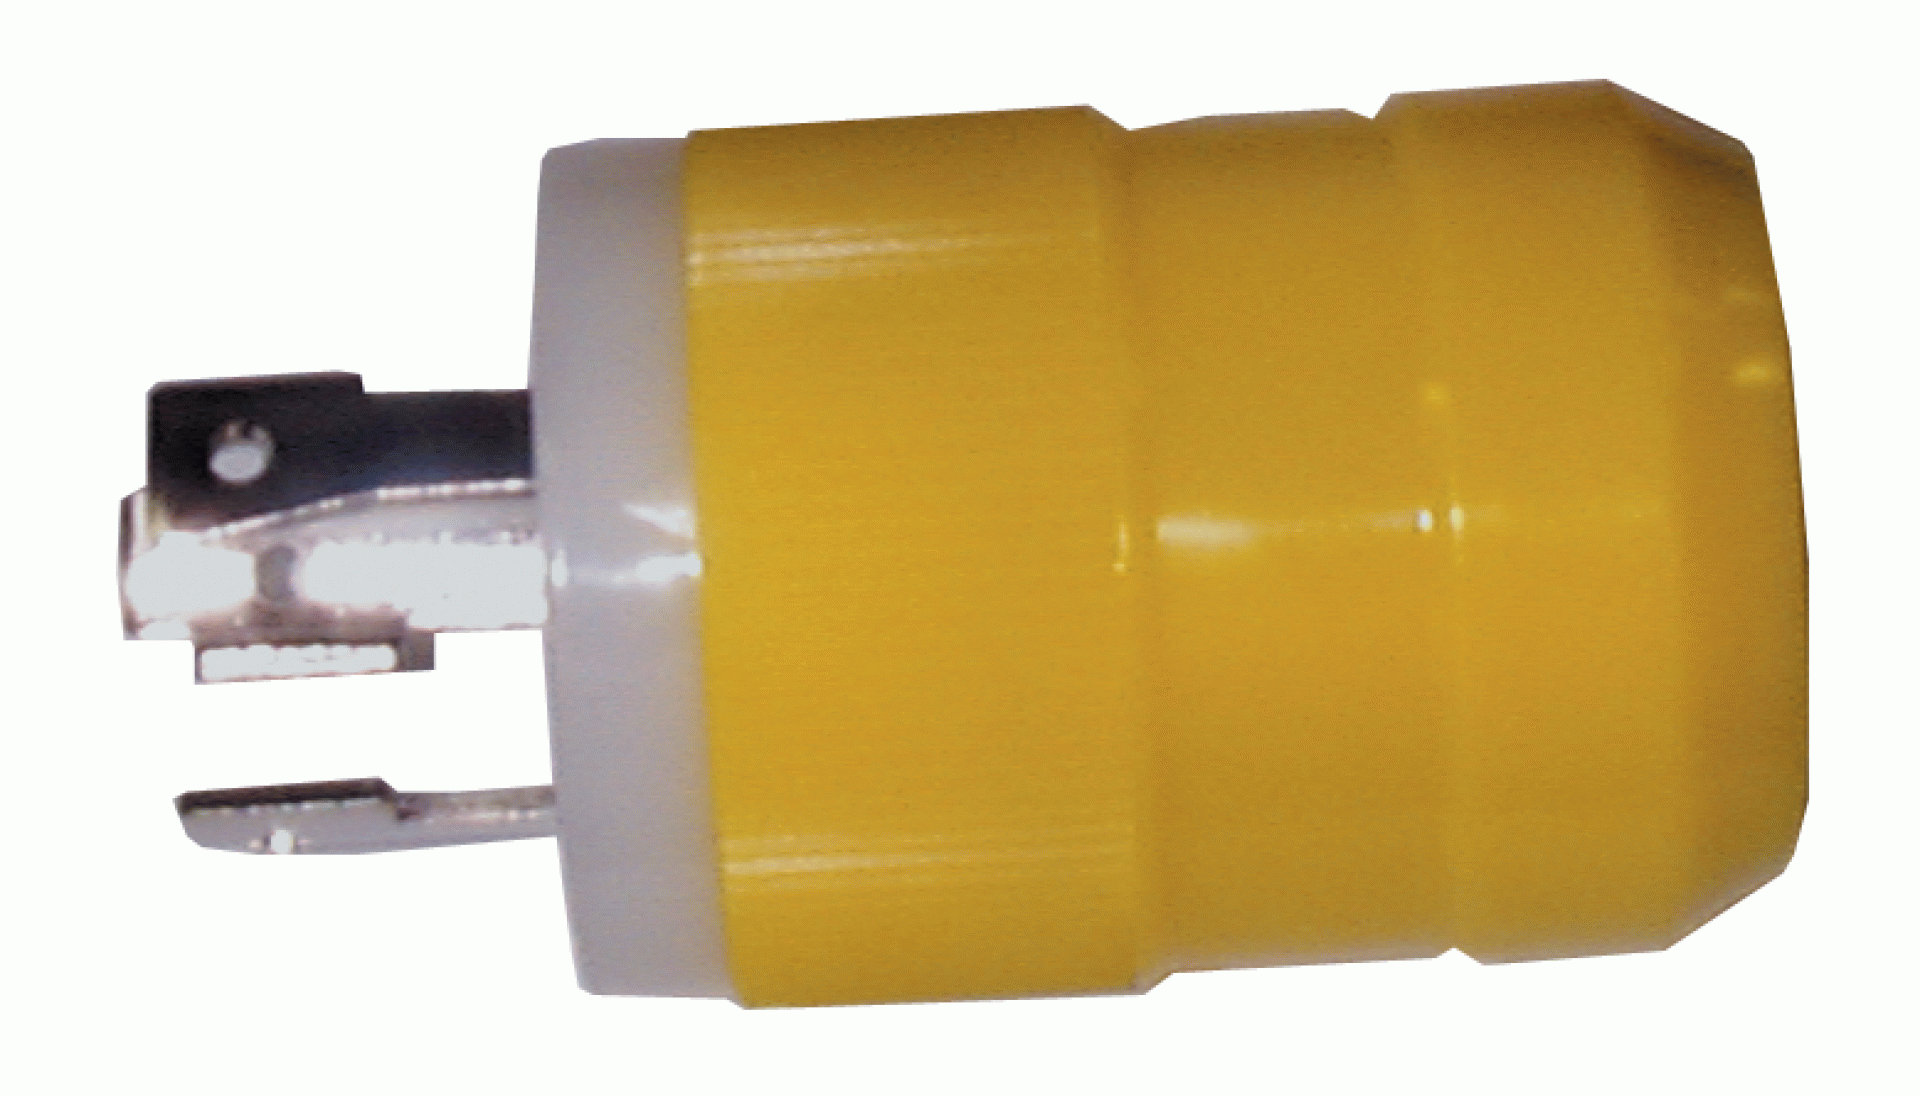 MARINCO | 305CRPN | CONNECTOR - 30 AMP MALE - 125V - 305 CRP